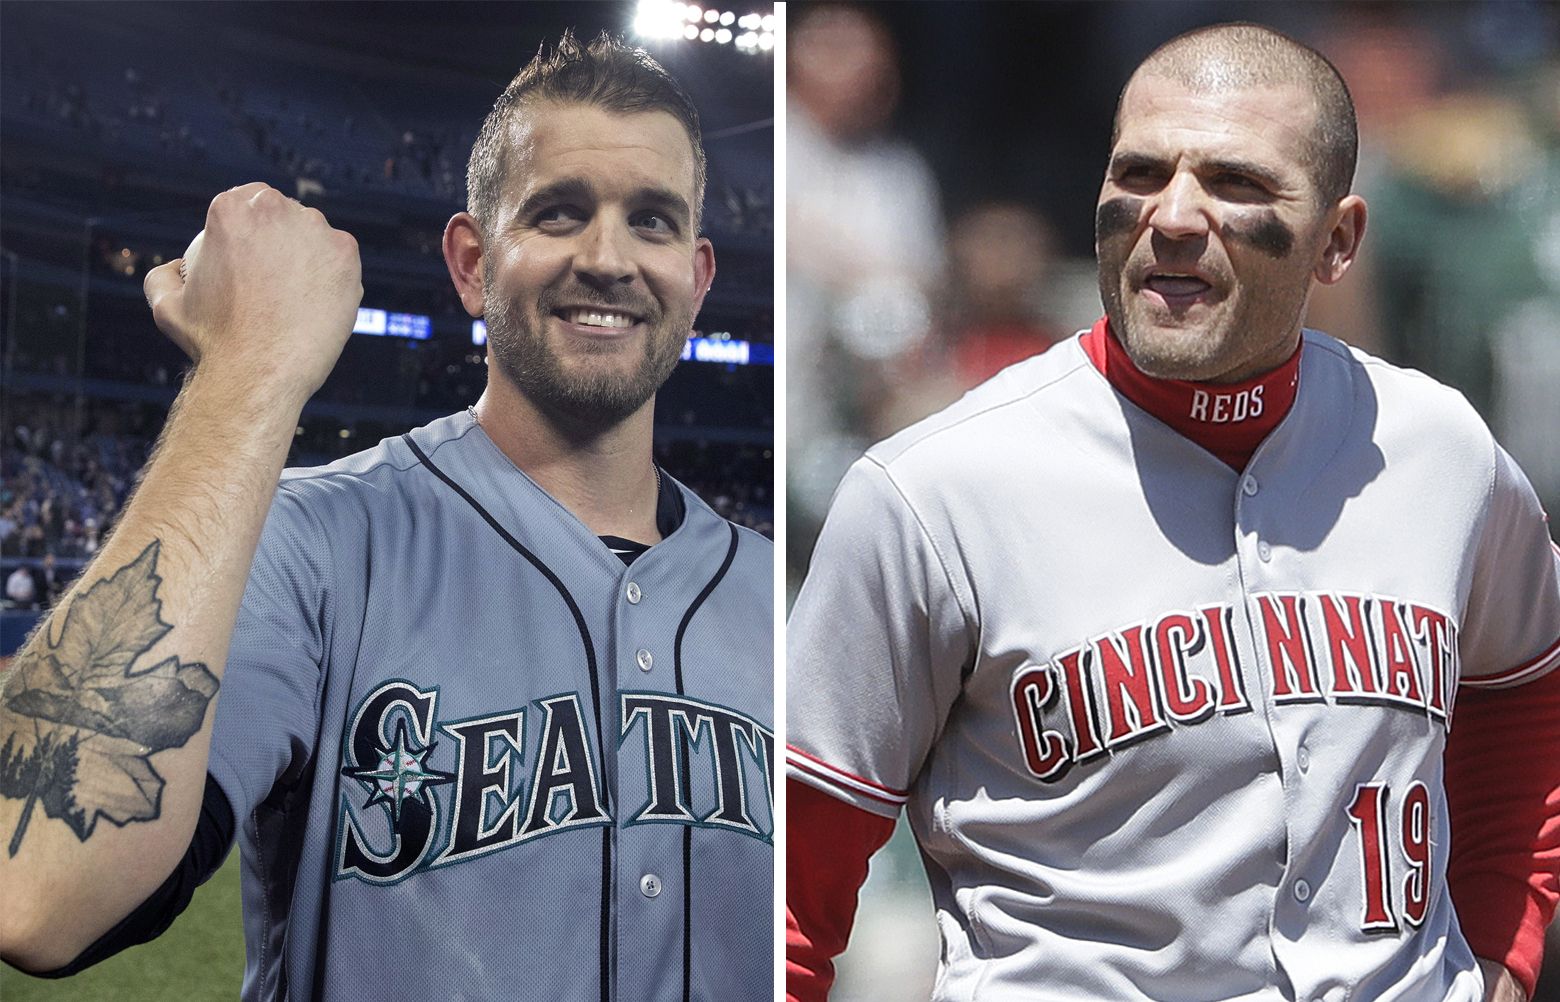 Fellow Canadian Joey Votto apologizes after dissing James Paxton's